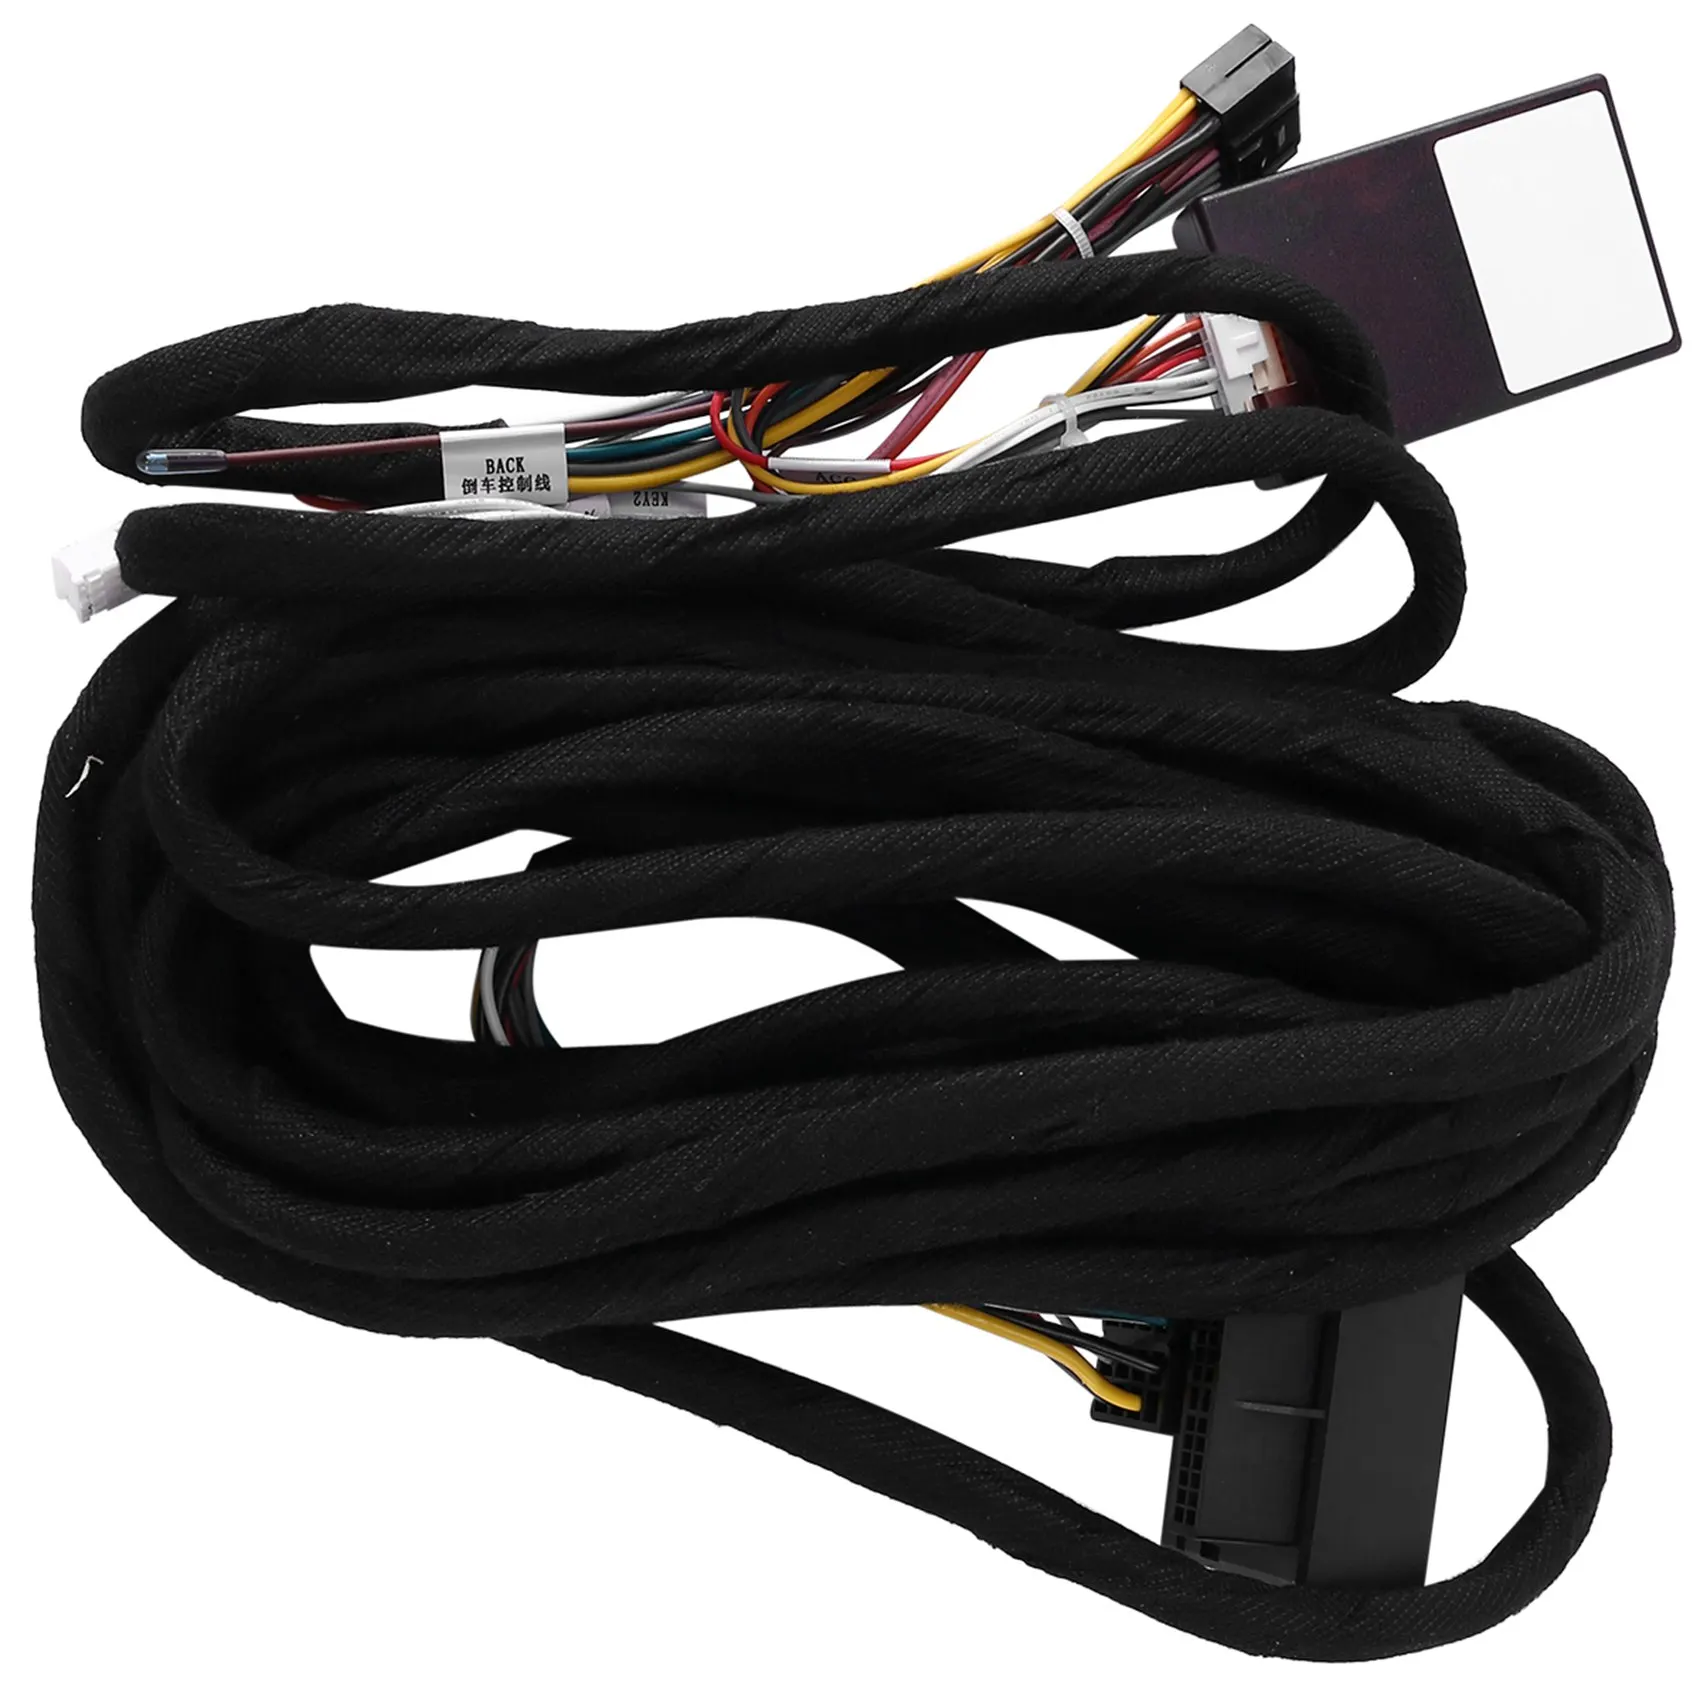 Car 16Pin 6-Meter Extended Wiring Harness Cable with Canbus For E39(01-04)/E53(01-05) Install Android Stereo Player